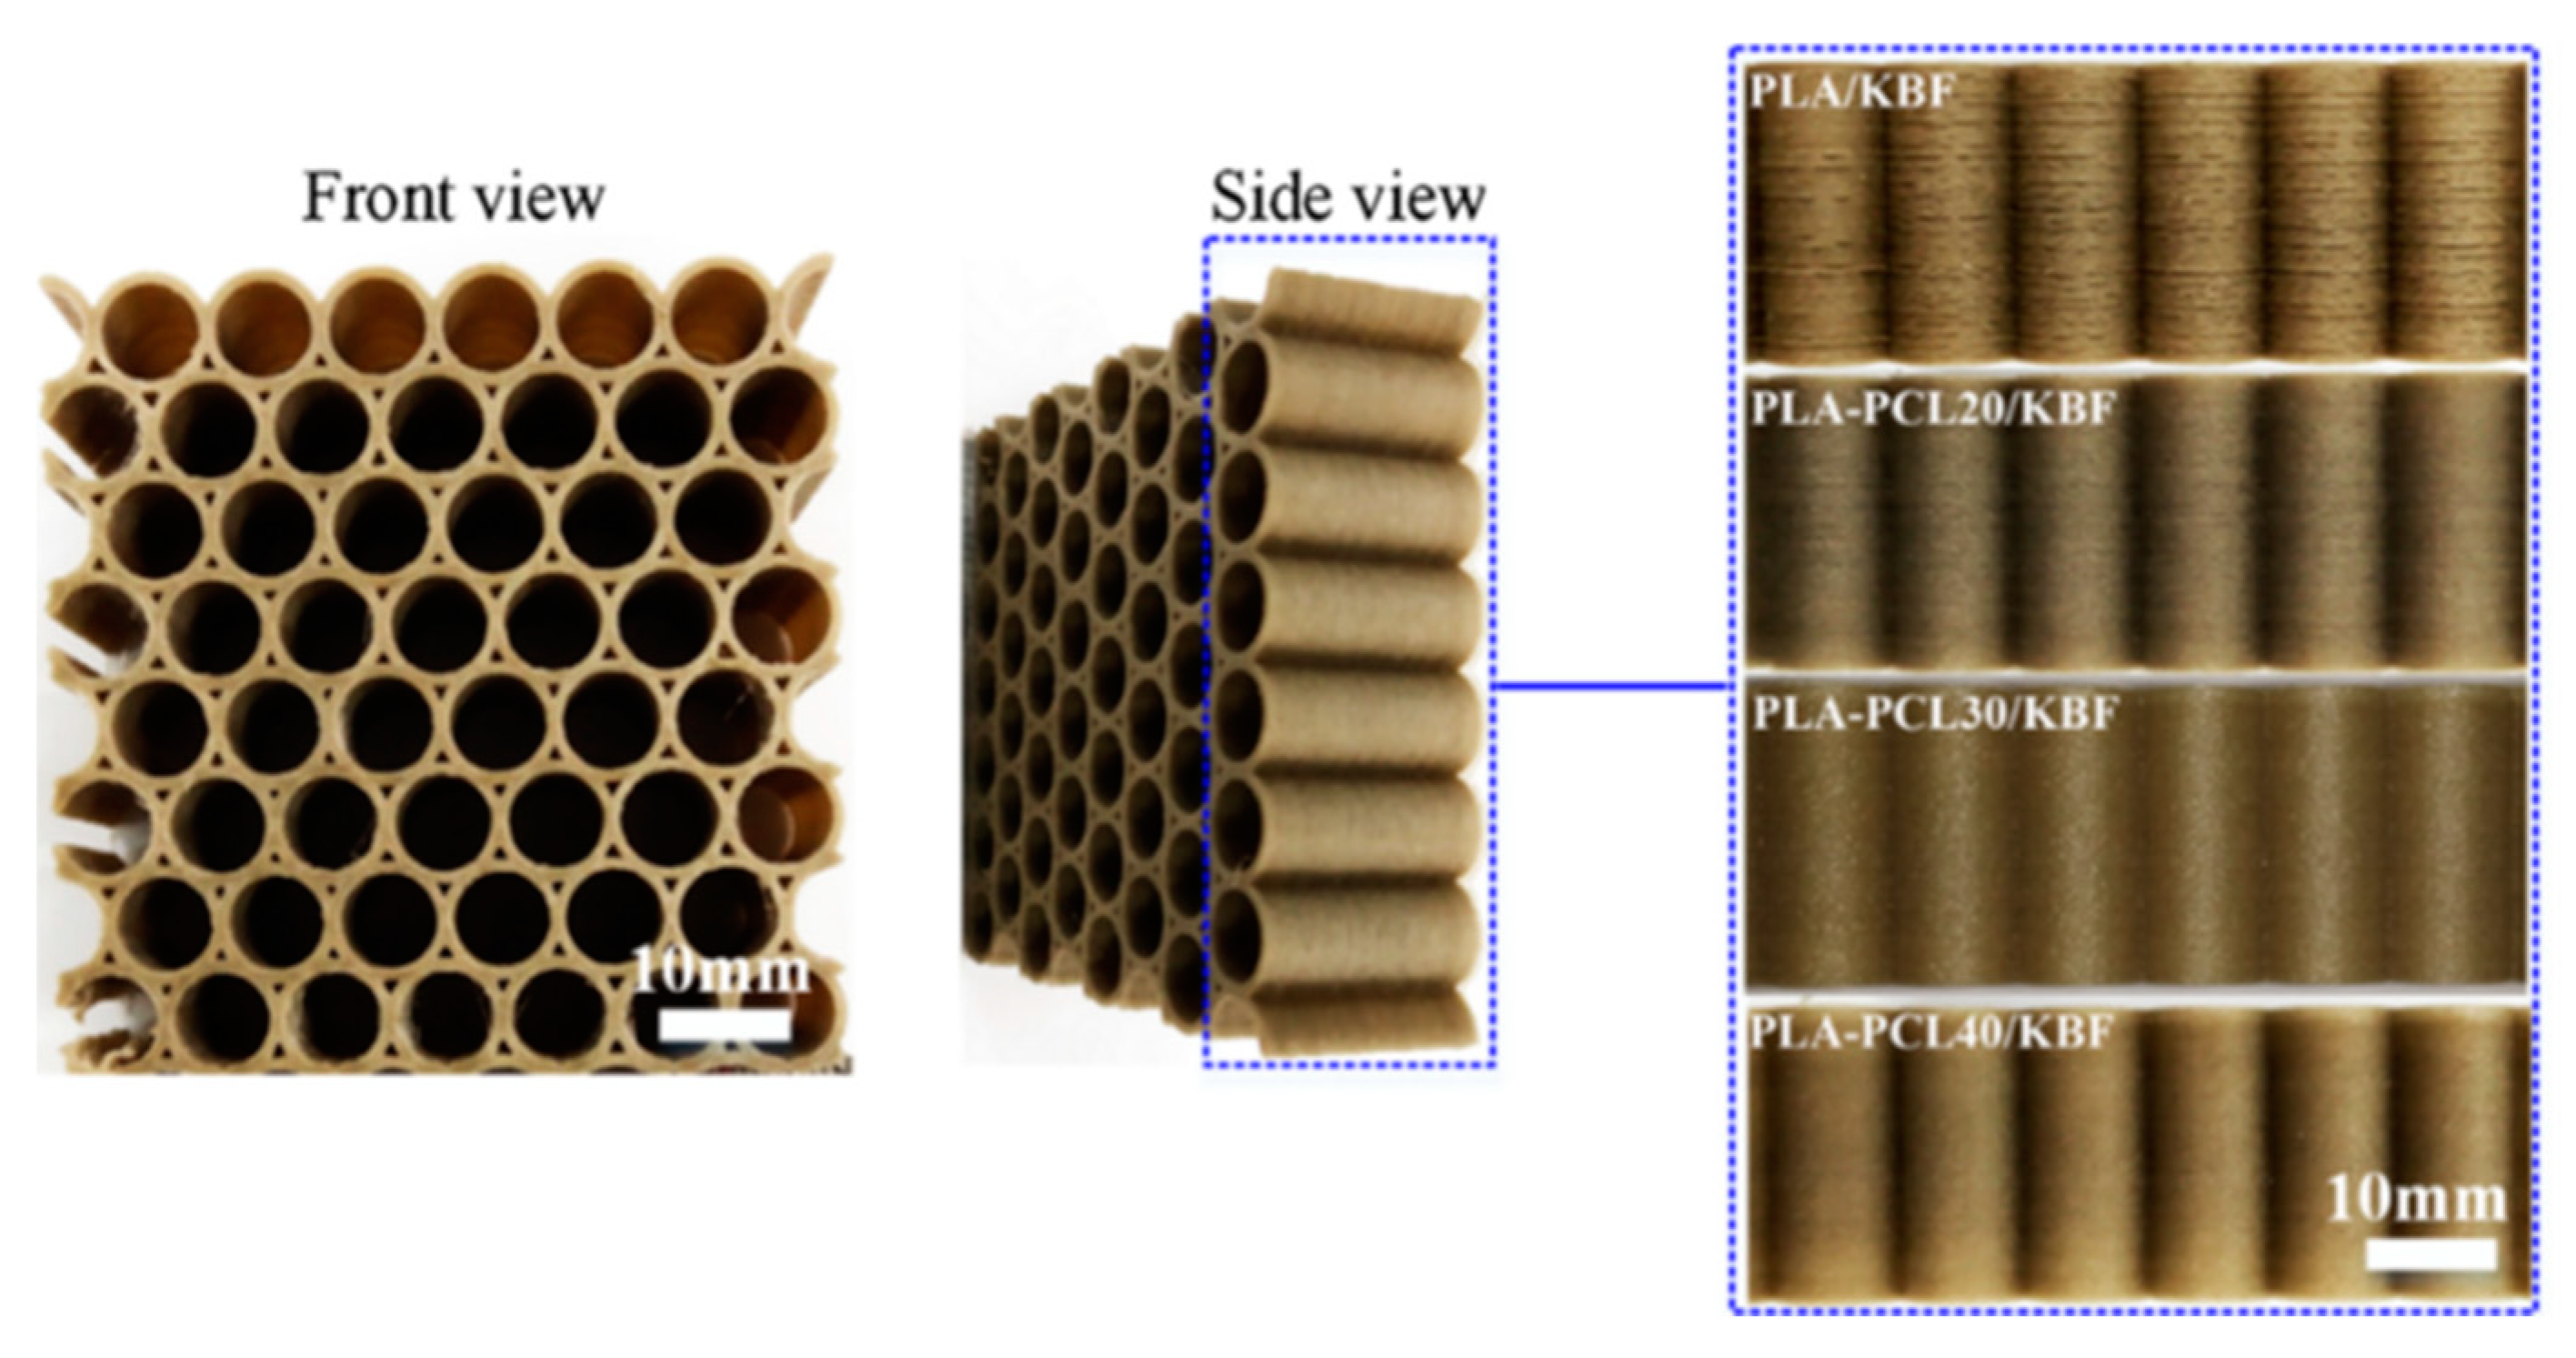 Polymers Free Full Text 3d Printing Of Fibre Reinforced Thermoplastic Composites Using Fused Filament Fabrication A Review Html